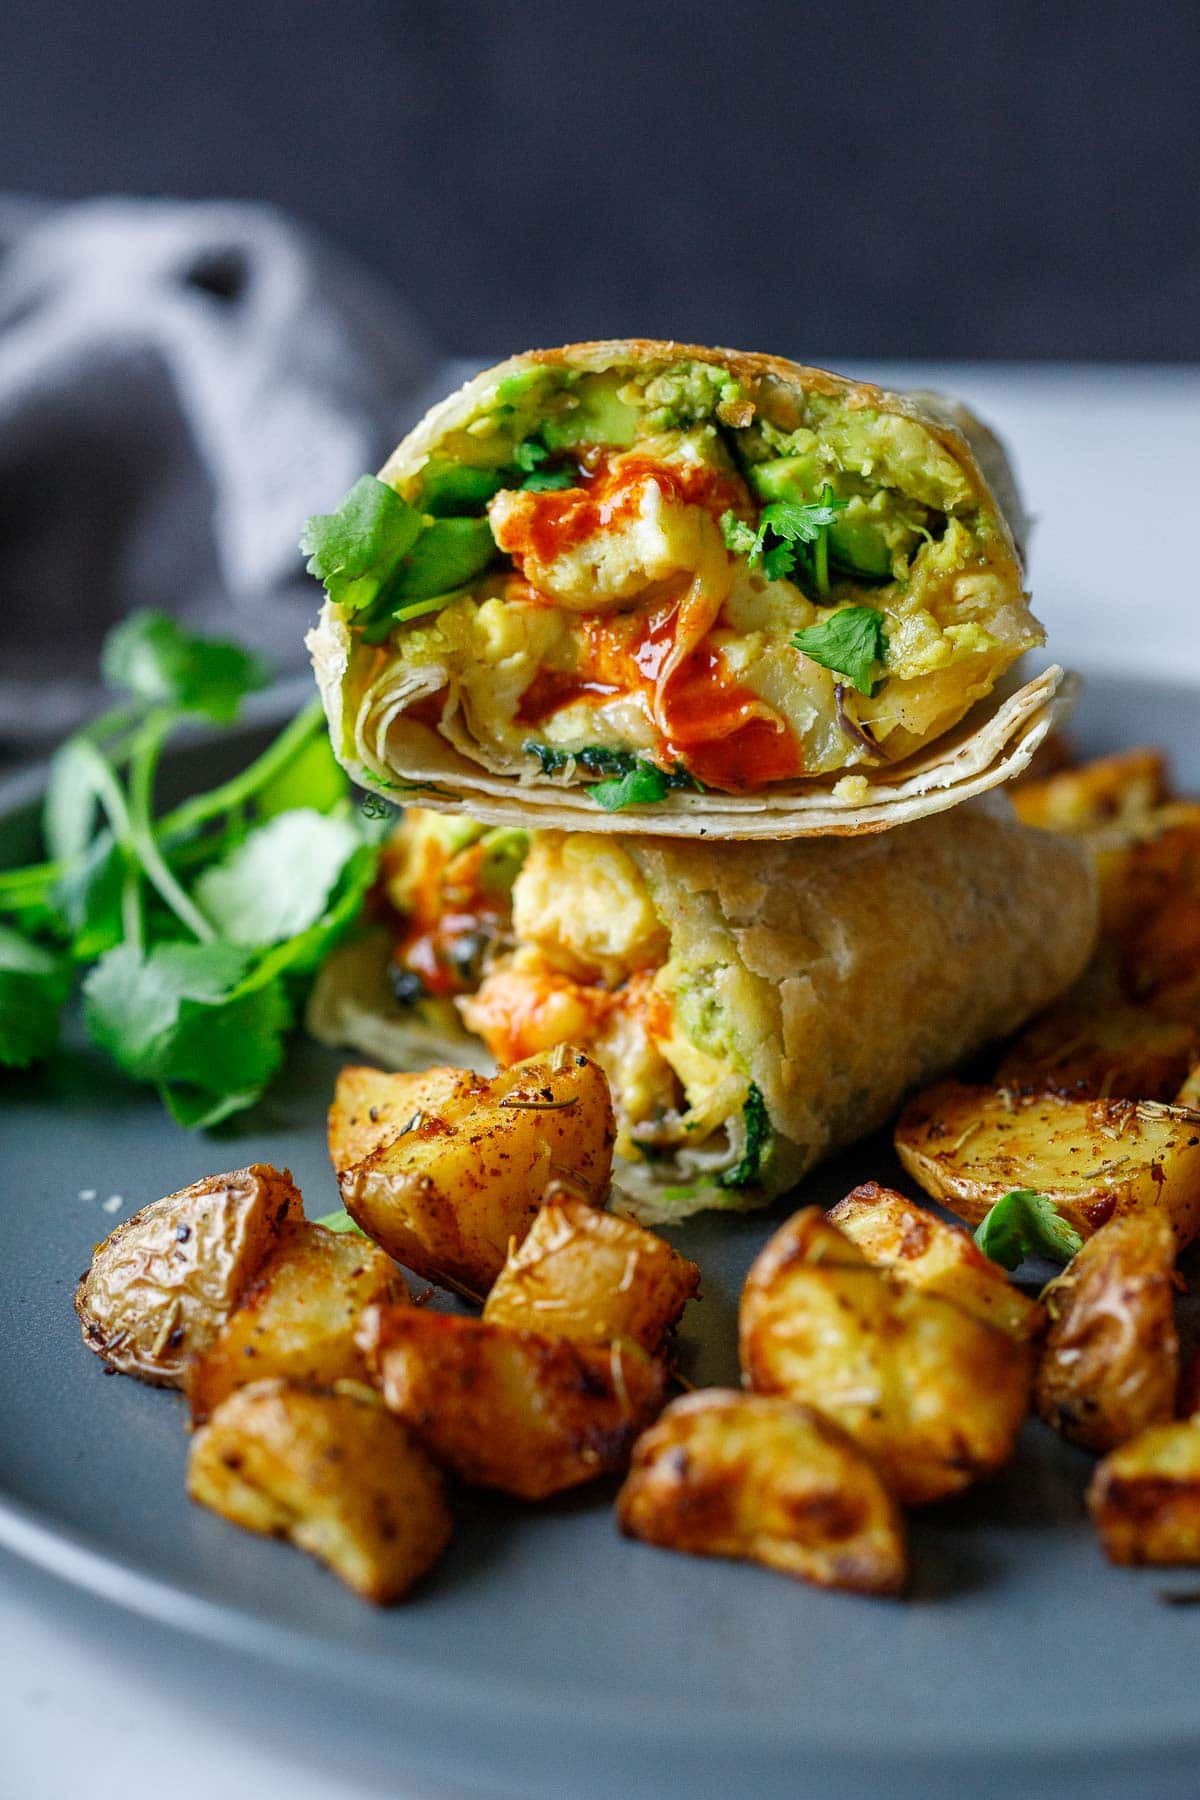 vegetarian breakfast burritos cut in half and stacked on plate with roasted potatoes.